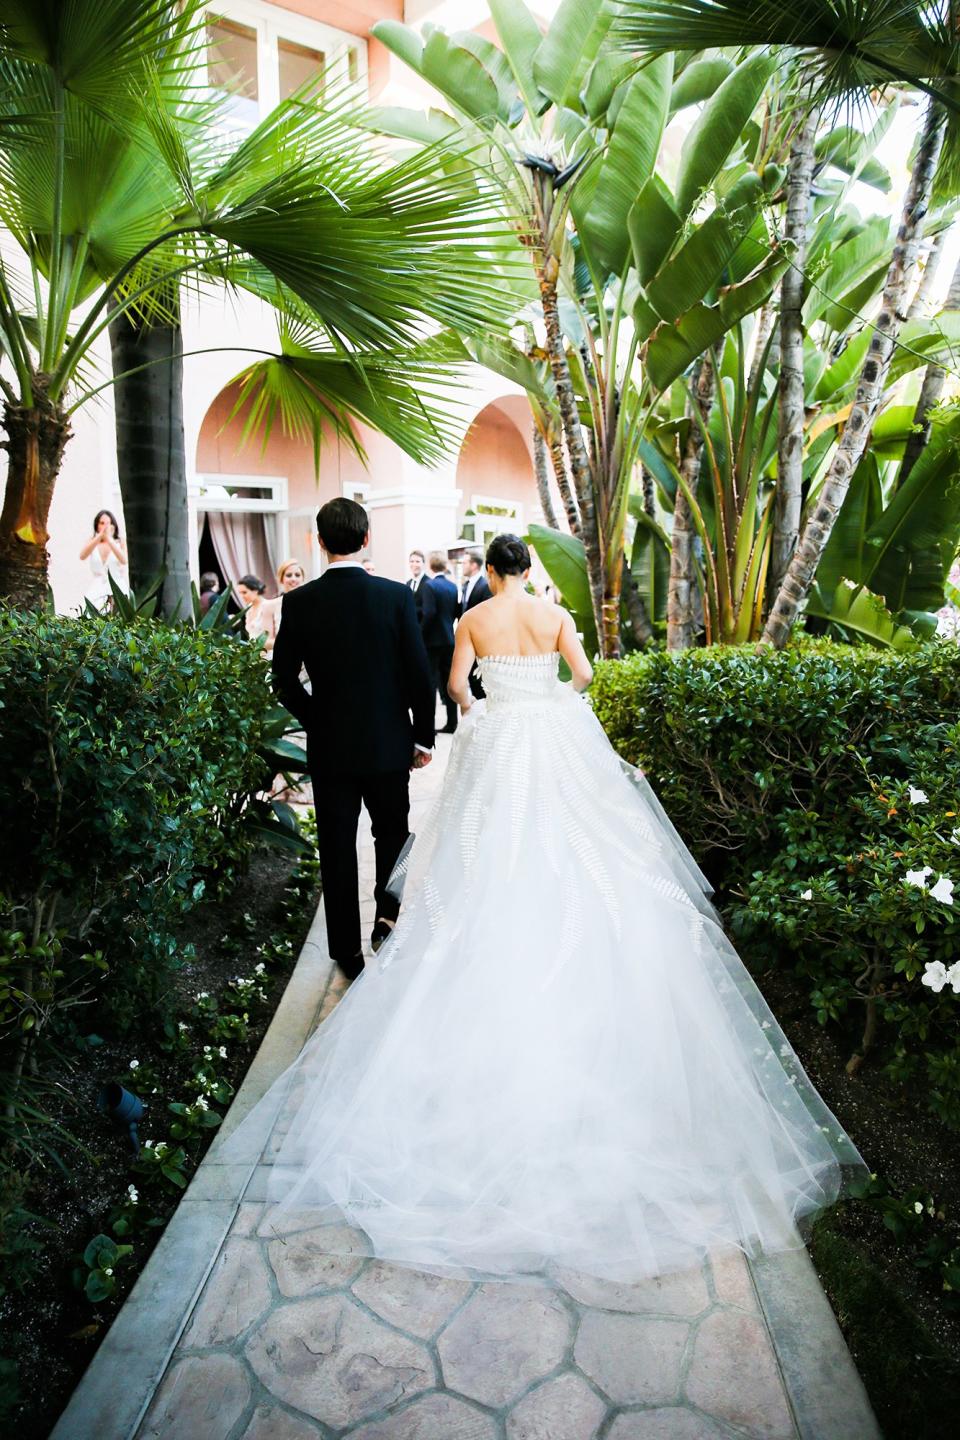 The bride wore Oscar de la Renta, inspired by her grandmother, for her greenery-filled ceremony at the Beverly Hills Hotel.